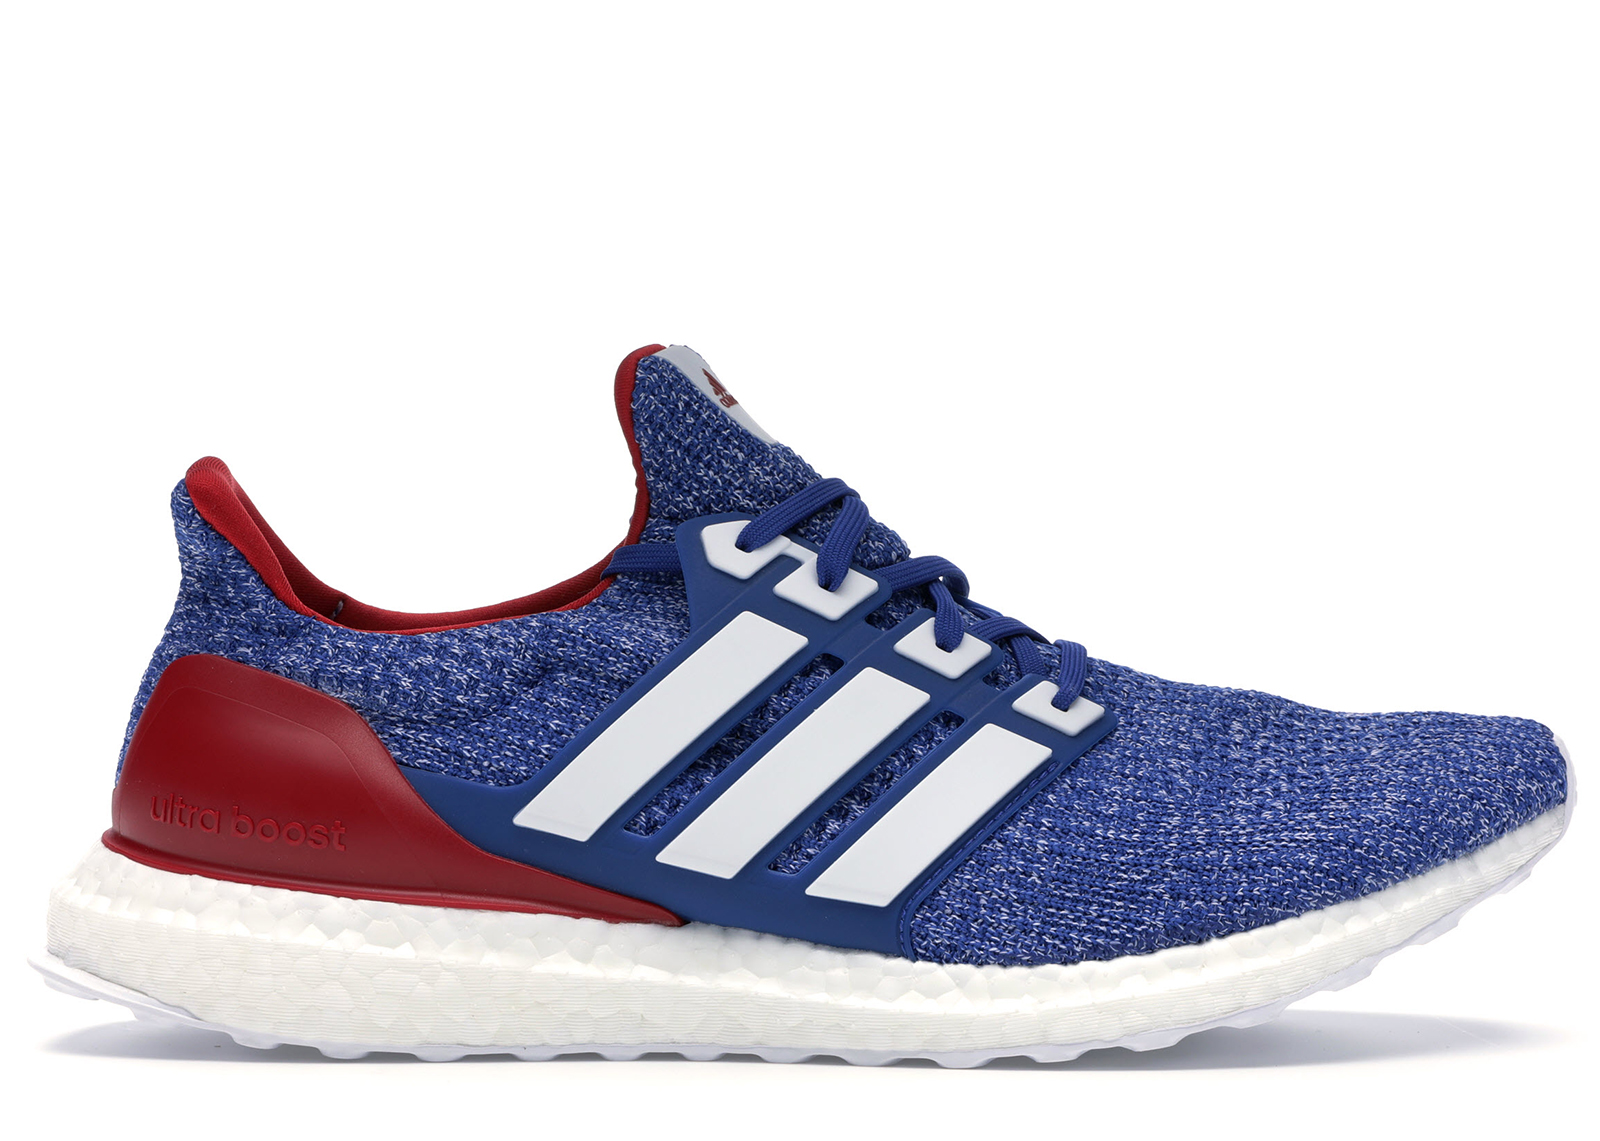 adidas pure boost on sale